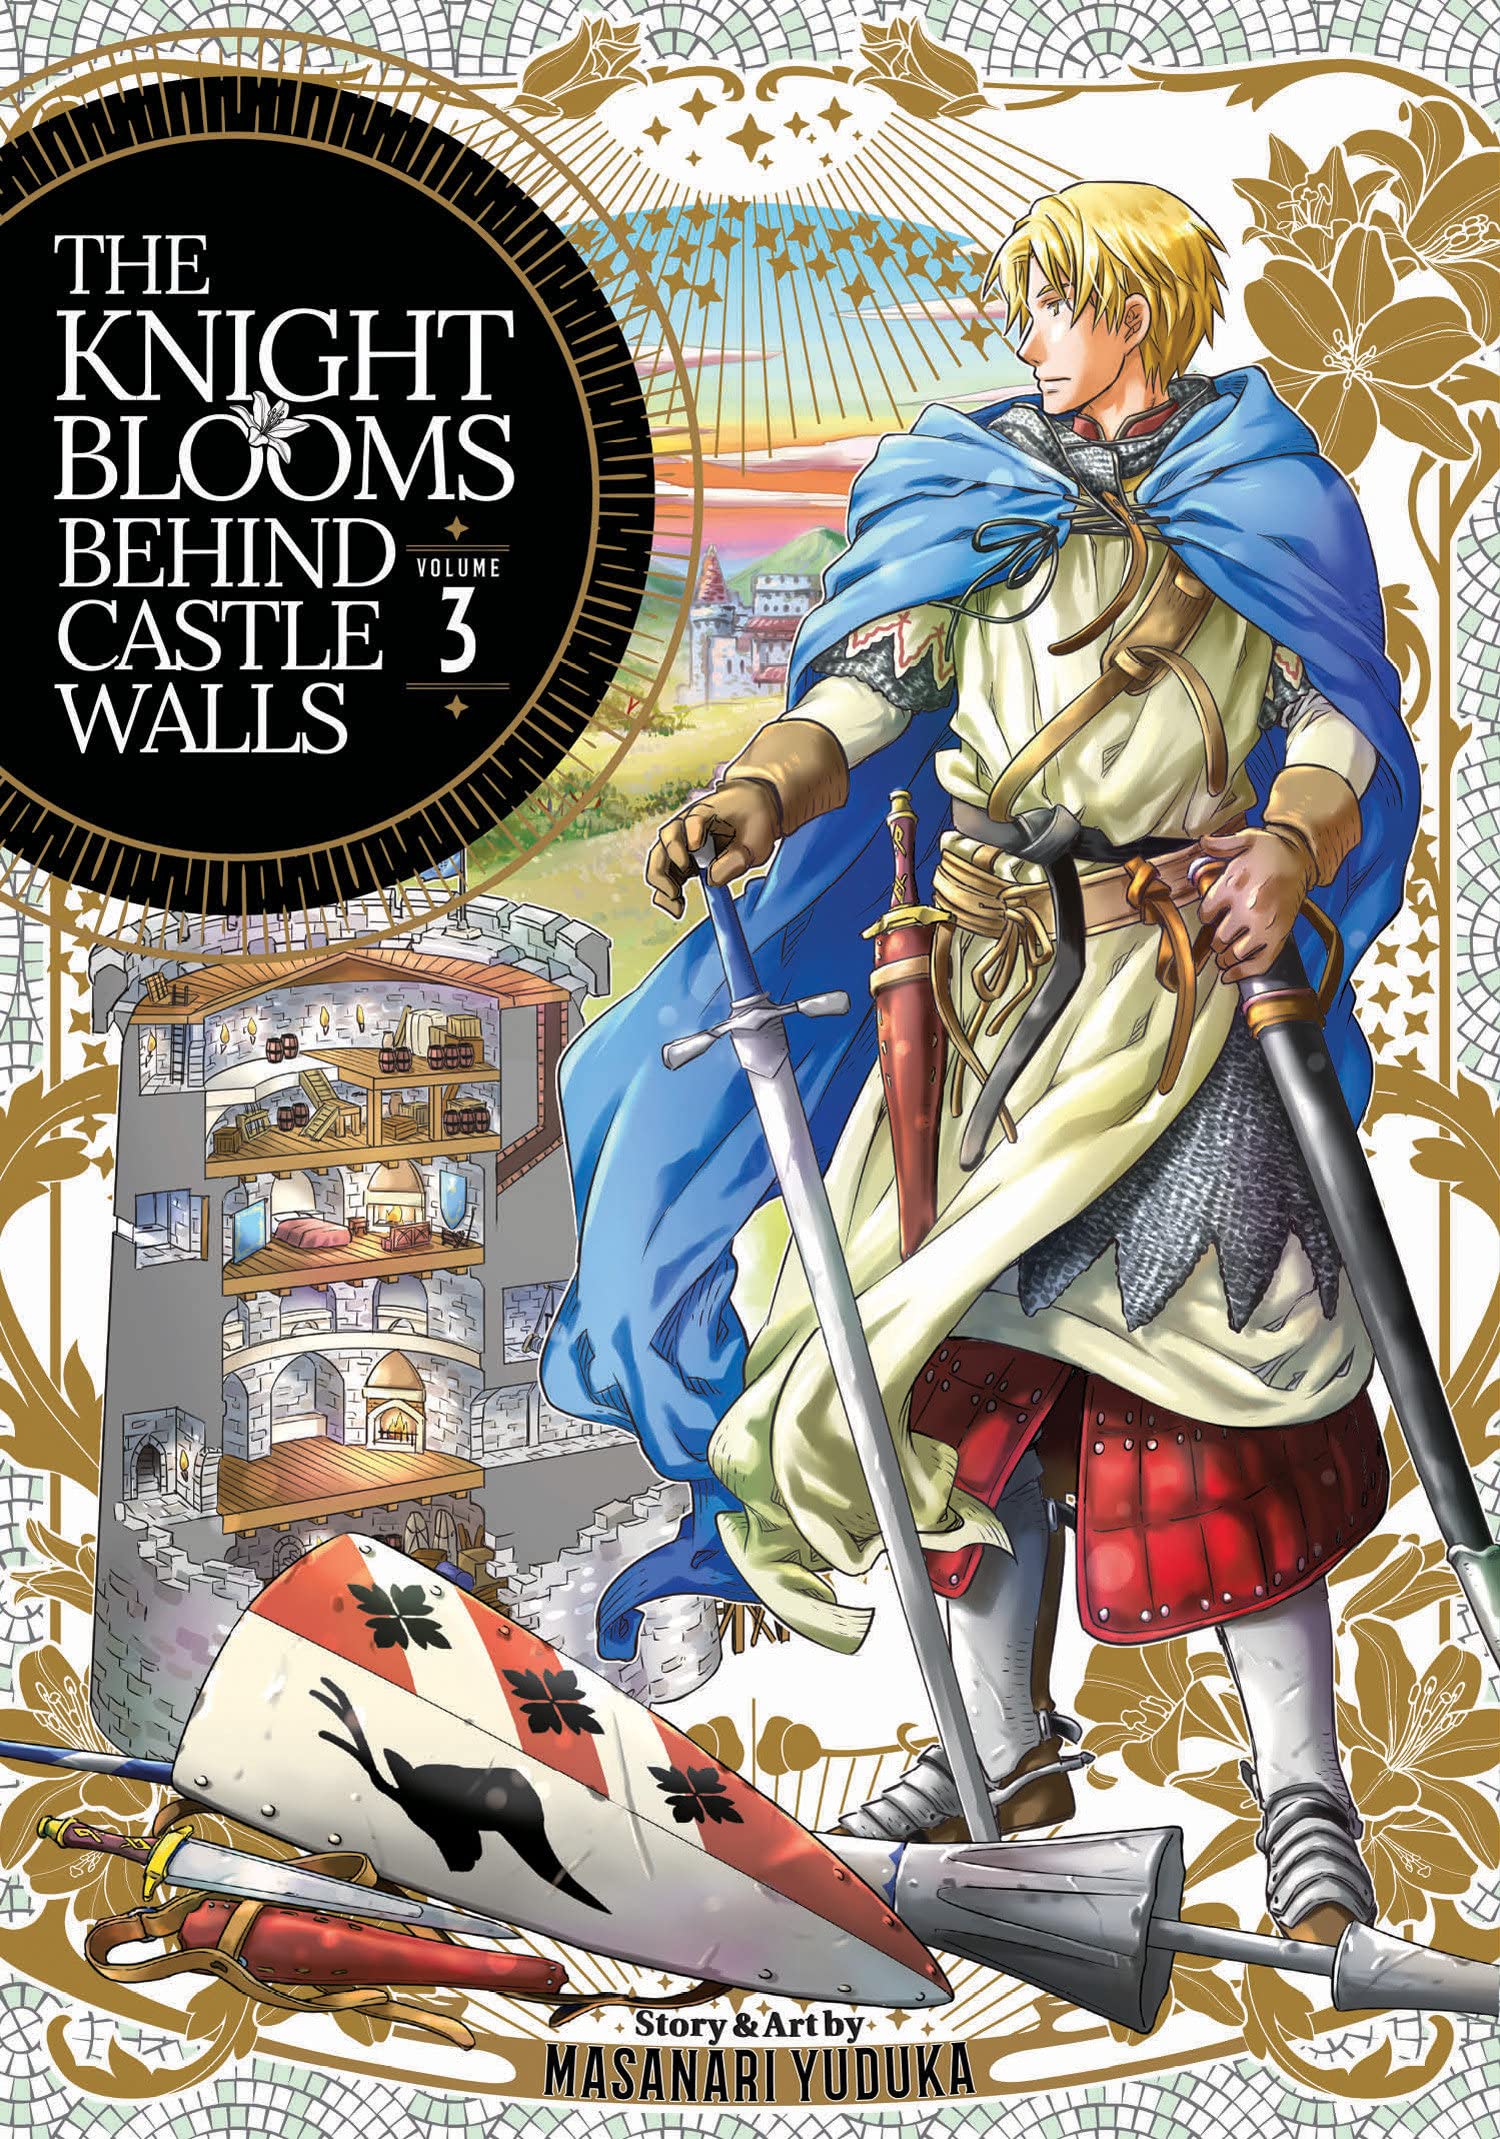 The Knight Blooms Behind Castle Walls Vol. 03